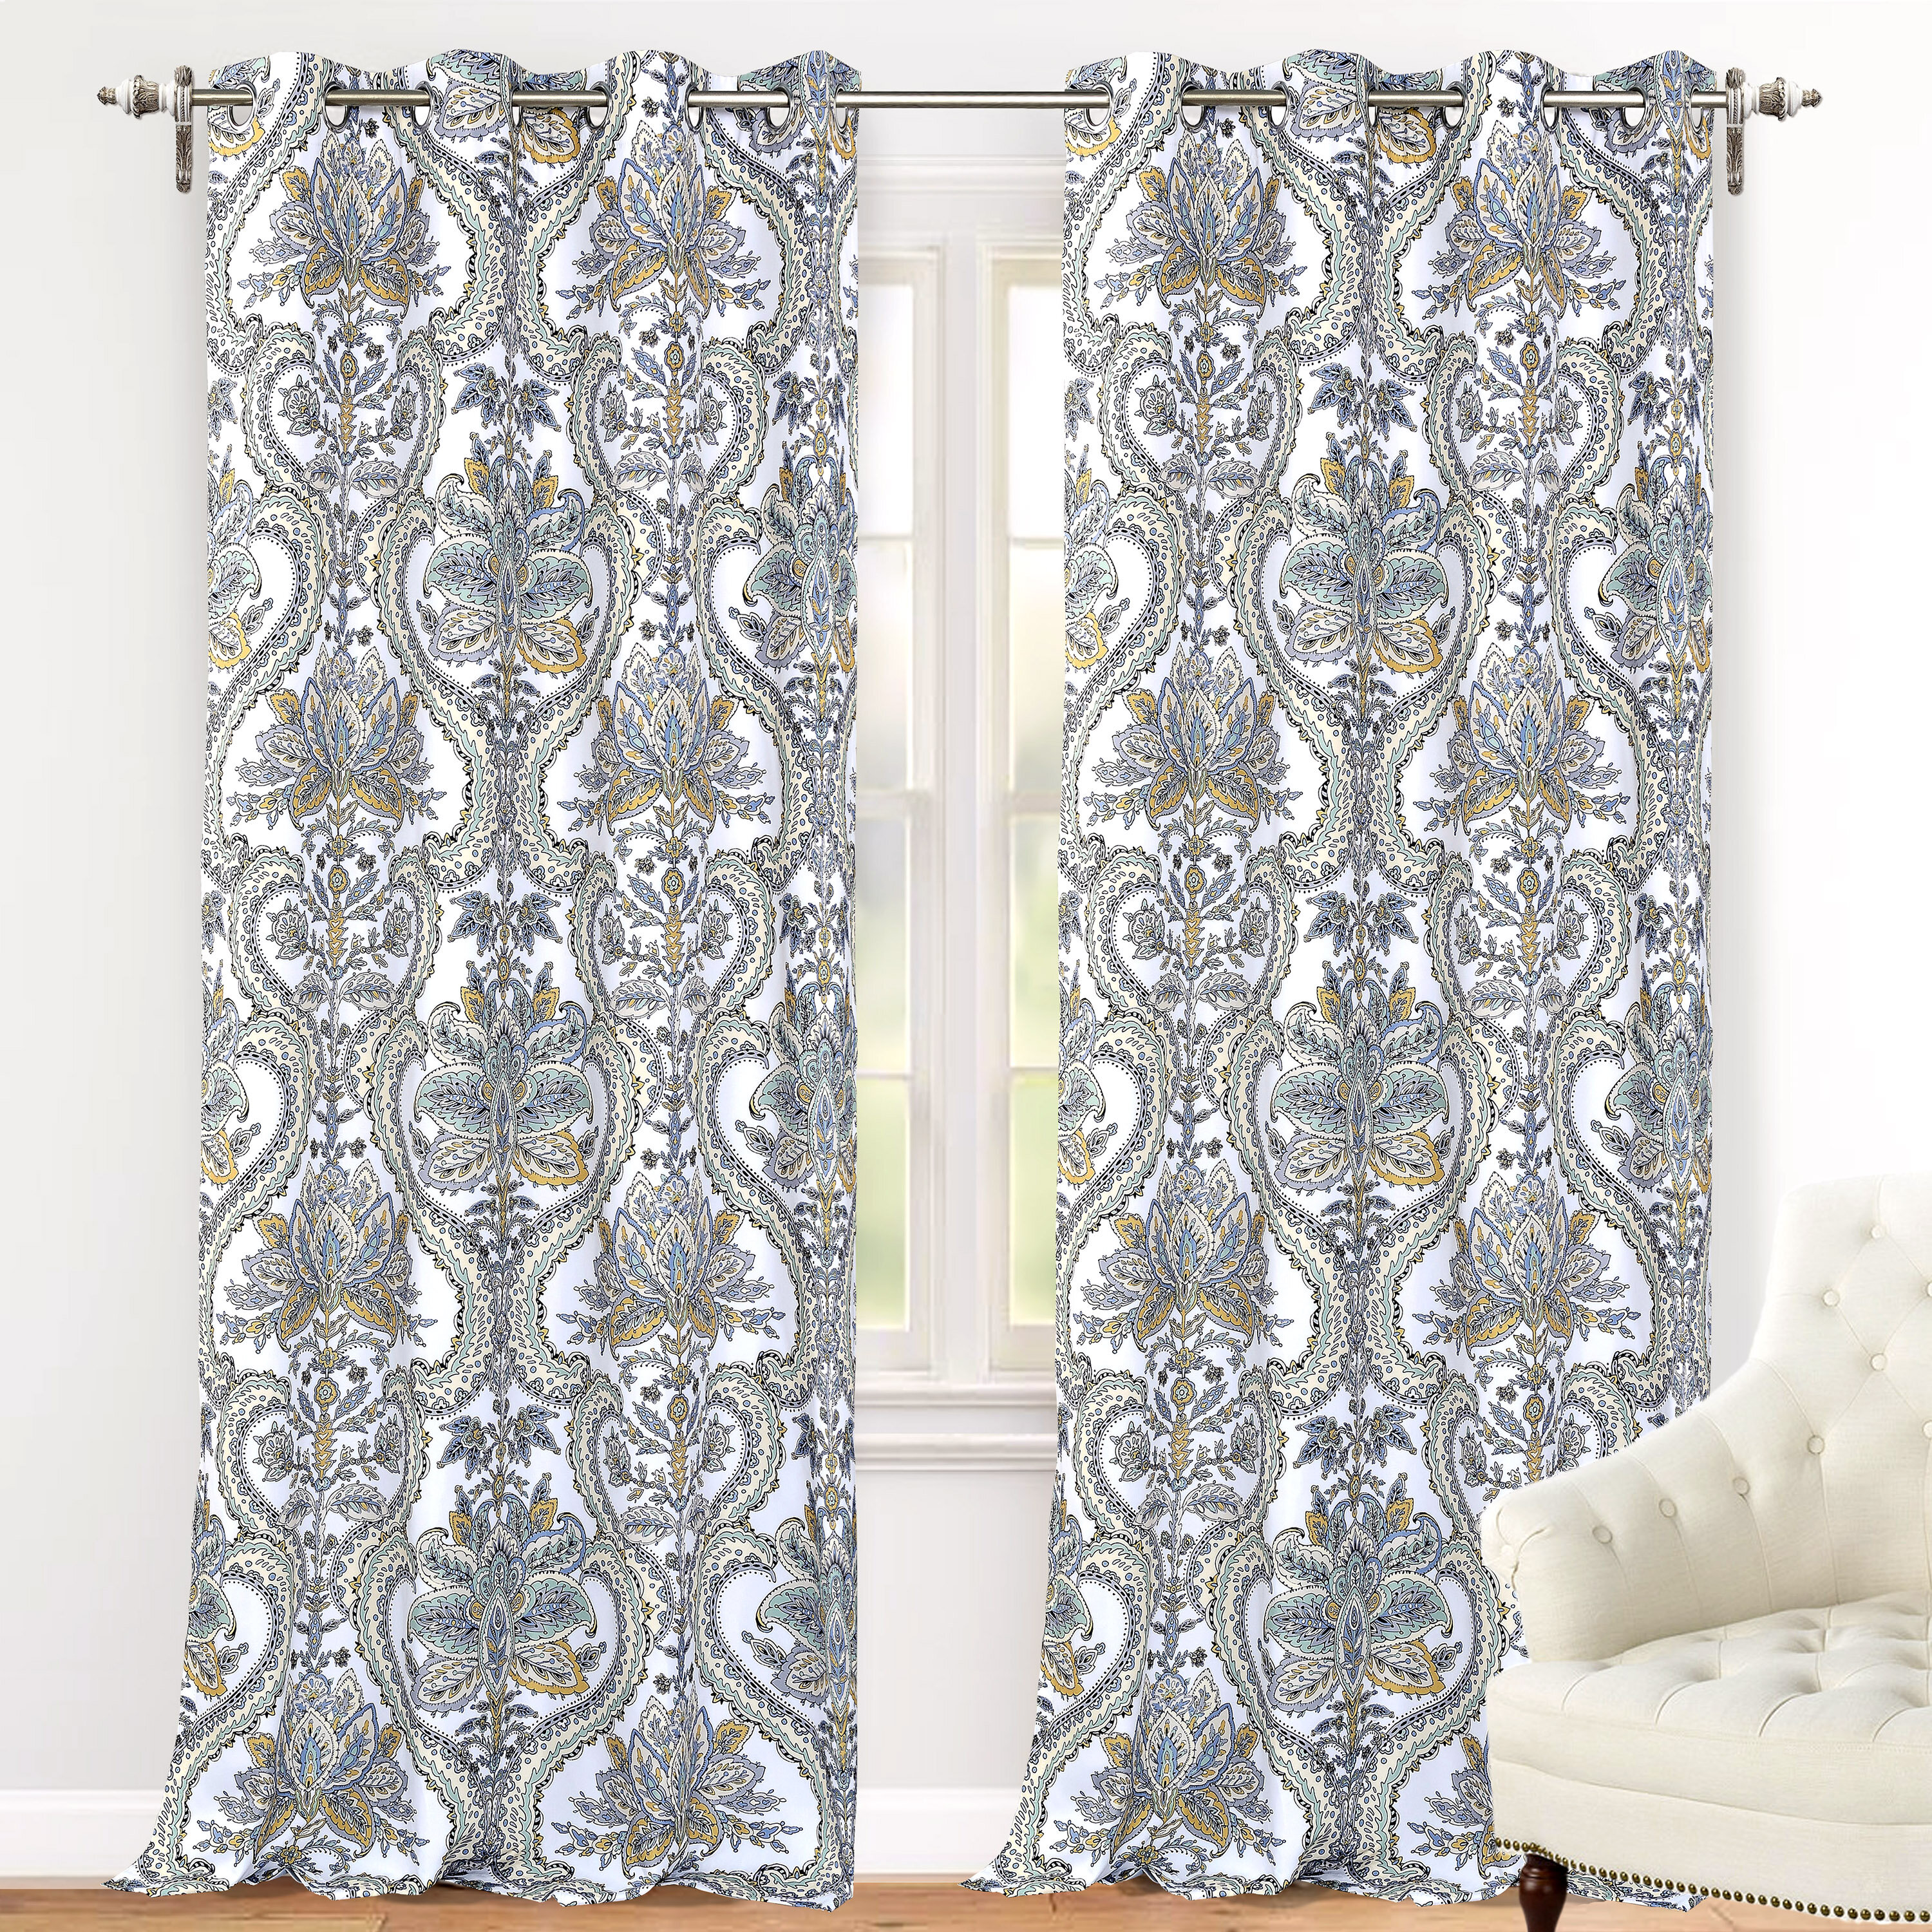 SET OF 2 CURTAIN WHITE SILVER YELLOW LEAFPRINTED WINDOW PANEL INSULATED THERMAL 